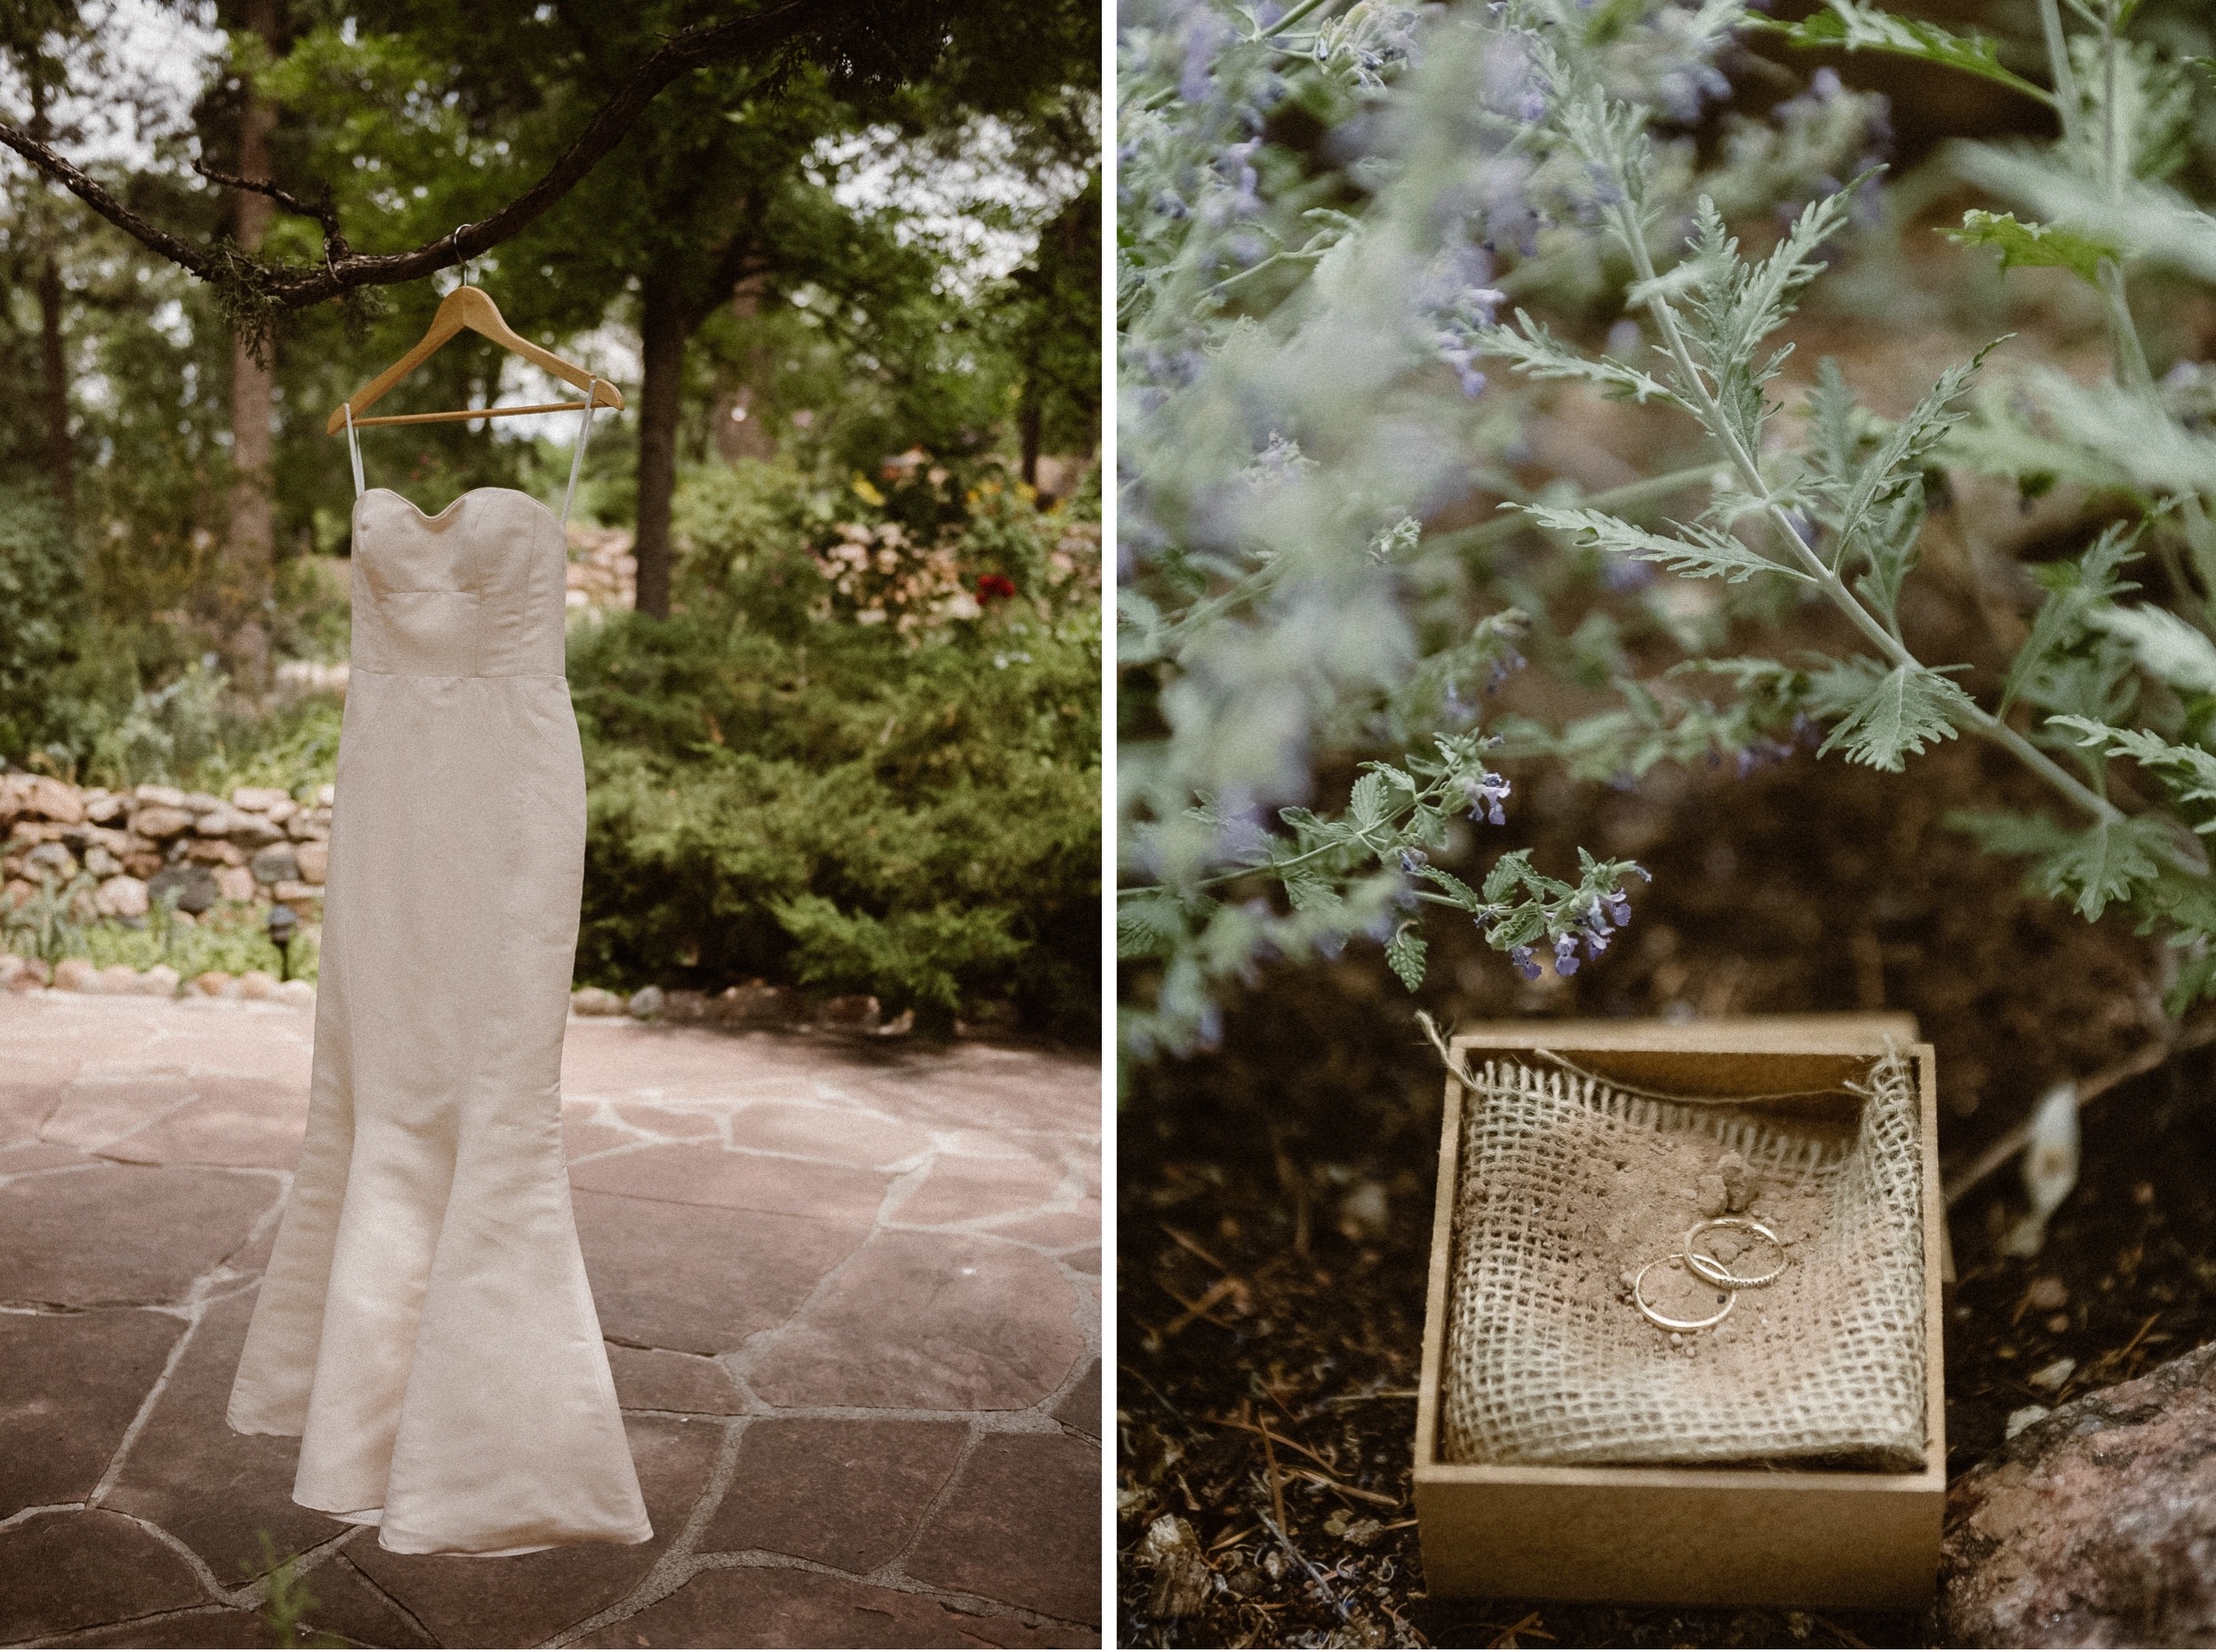 Elopement wedding dress and wedding rings | Wedding details at Inn of the Turquoise Bear in Santa Fe, New Mexico | Santa Fe lesbian elopement | Santa Fe elopement photographer | Santa Fe wedding | LGBTQ elopement | Photo by Denver Elopement Photographer Ashley Joyce Photography, copyright 2021